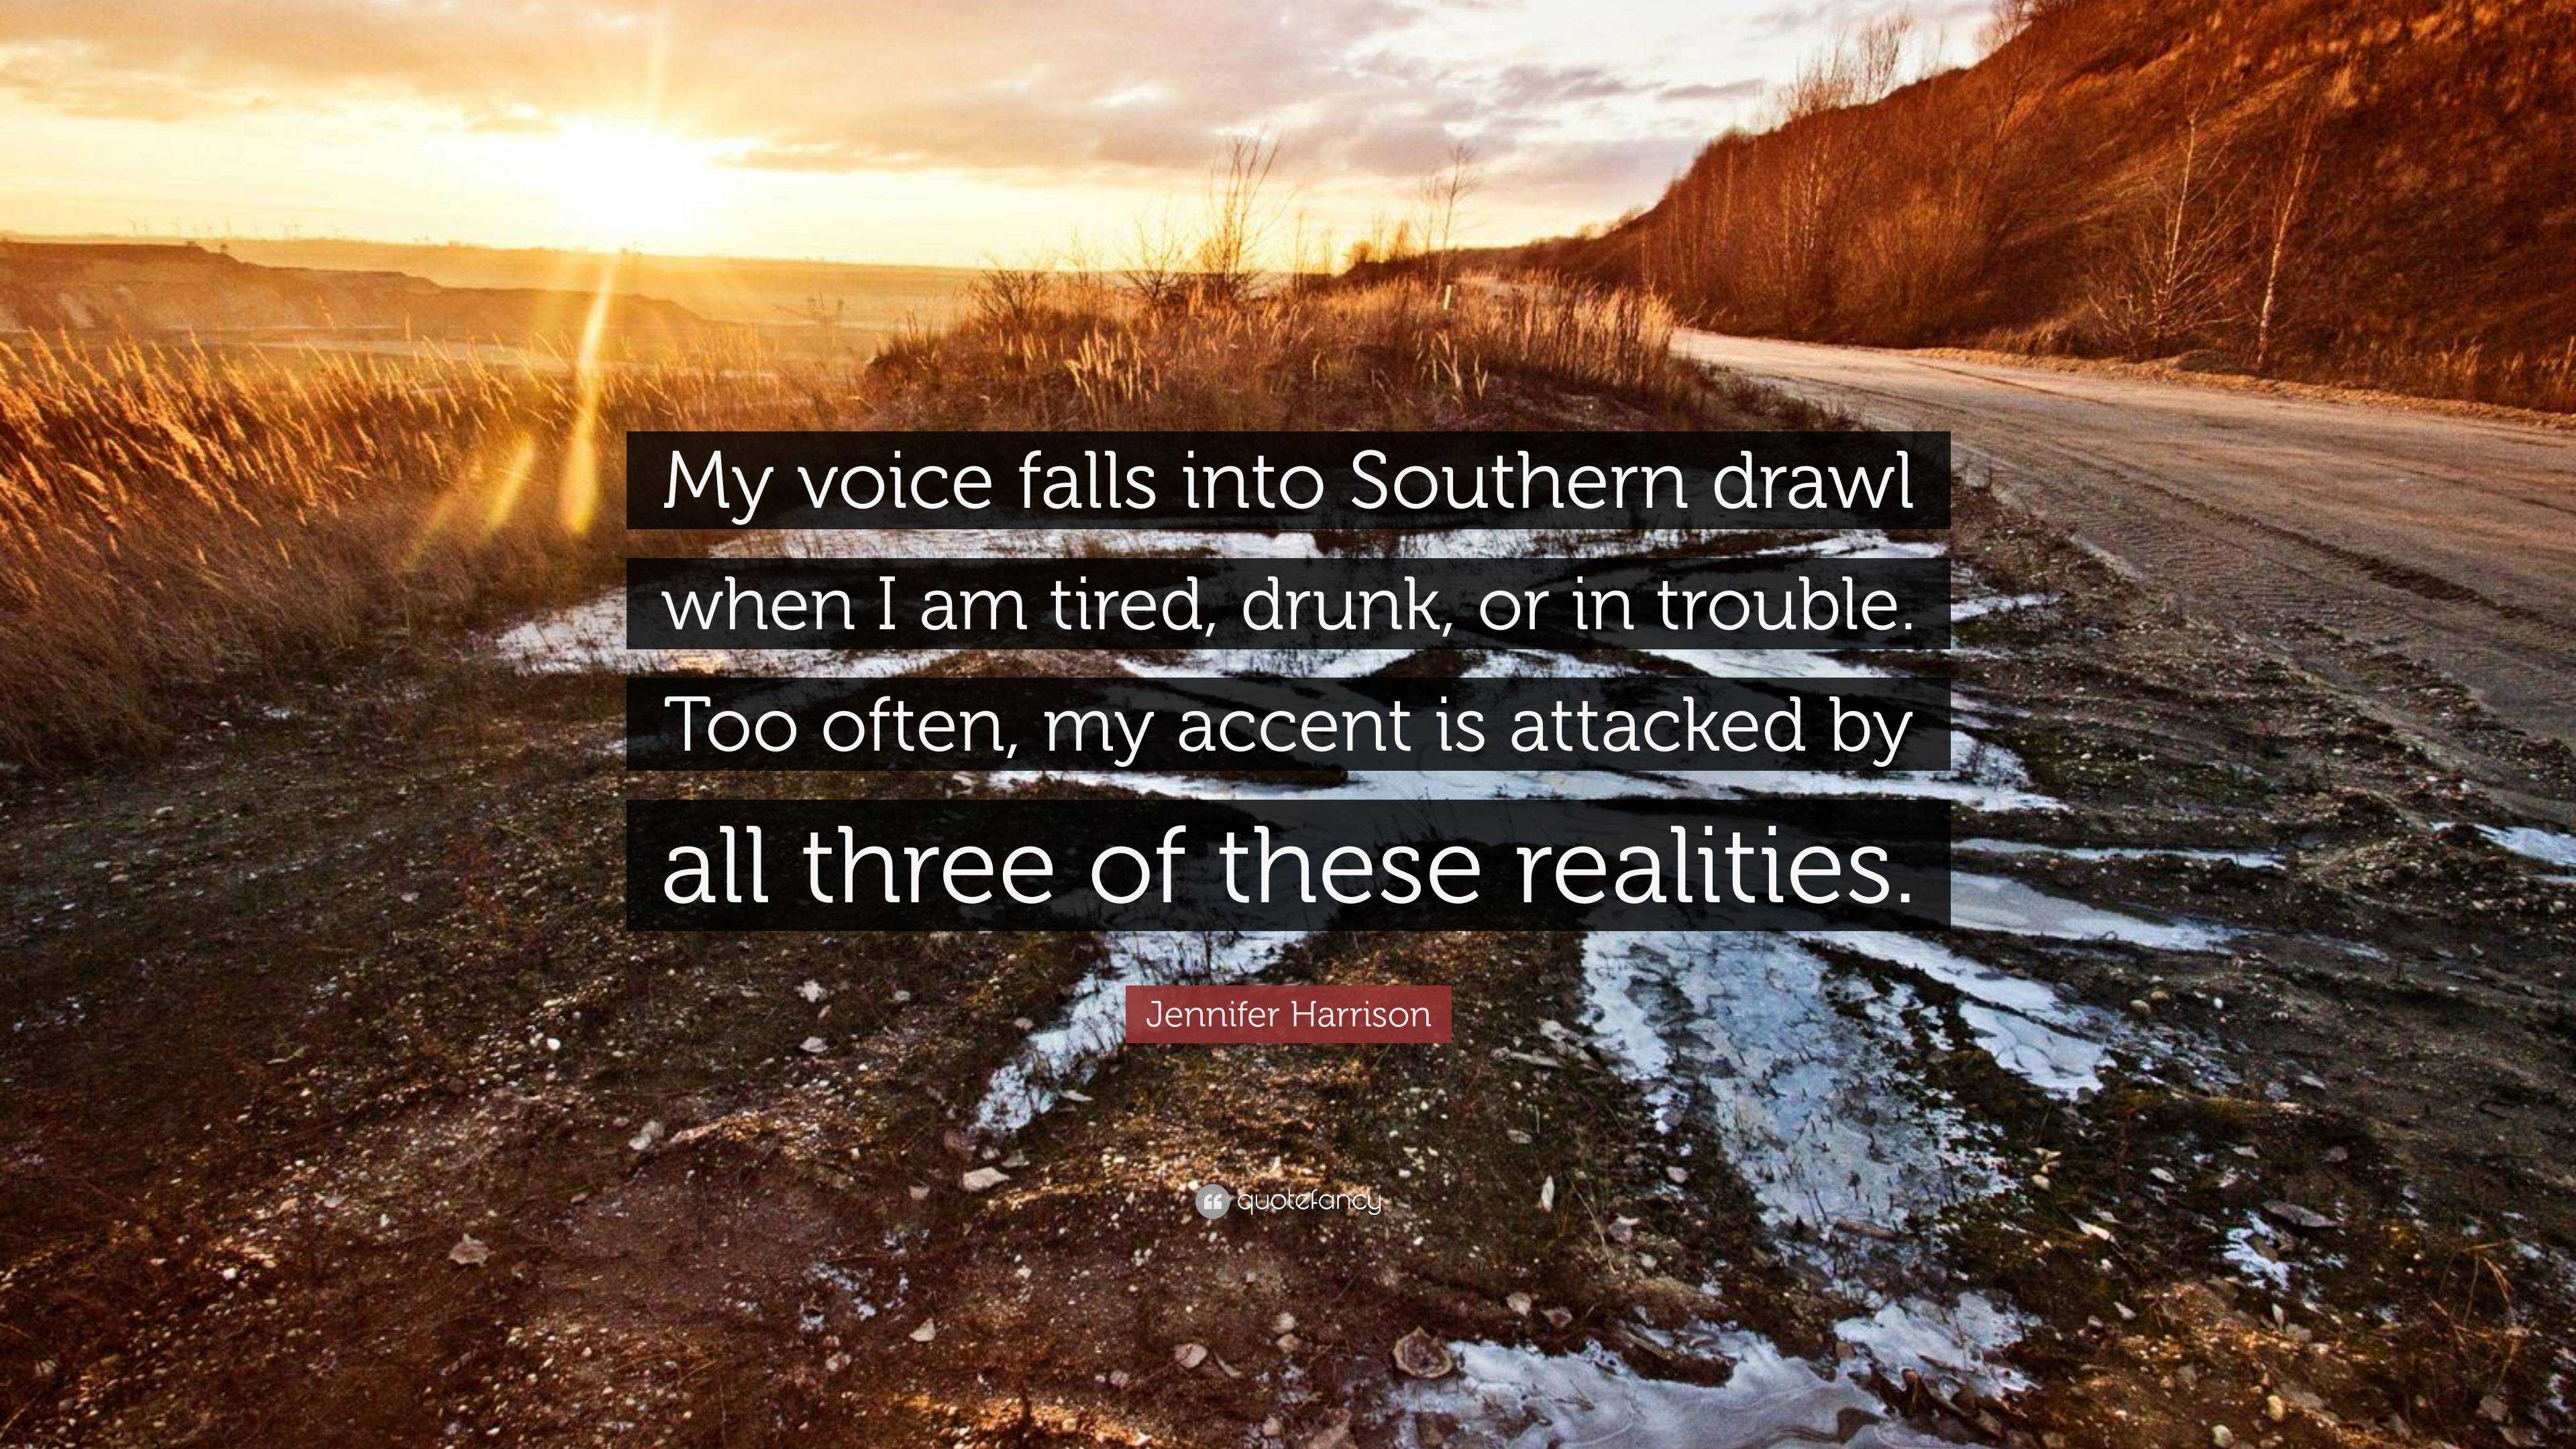 https://quotefancy.com/media/wallpaper/3840x2160/6572797-Jennifer-Harrison-Quote-My-voice-falls-into-Southern-drawl-when-I.jpg